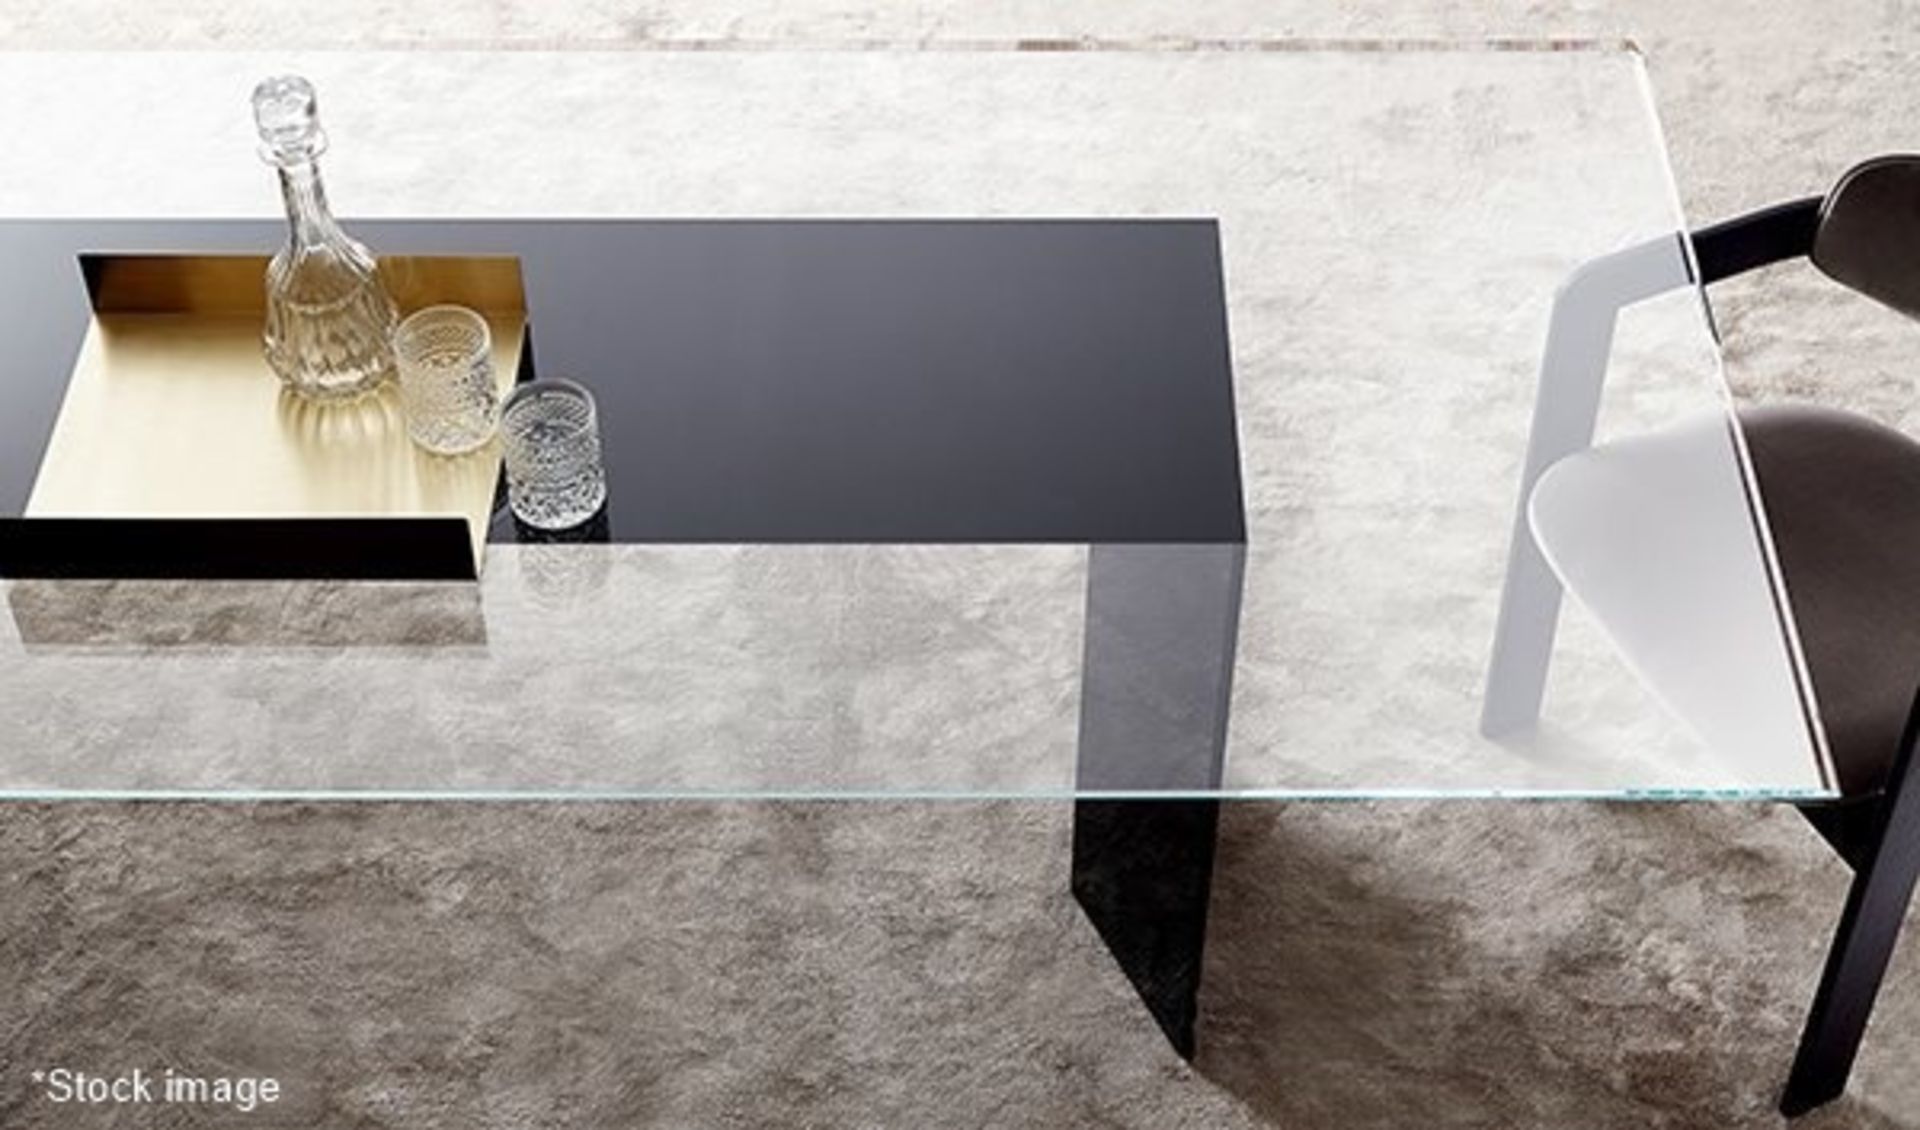 1 x GALLOTTI & RADICE 'Dolm' 2.4-Metre Luxury Dining Table With Painted Glass Top - RRP £3,645 - Image 2 of 12